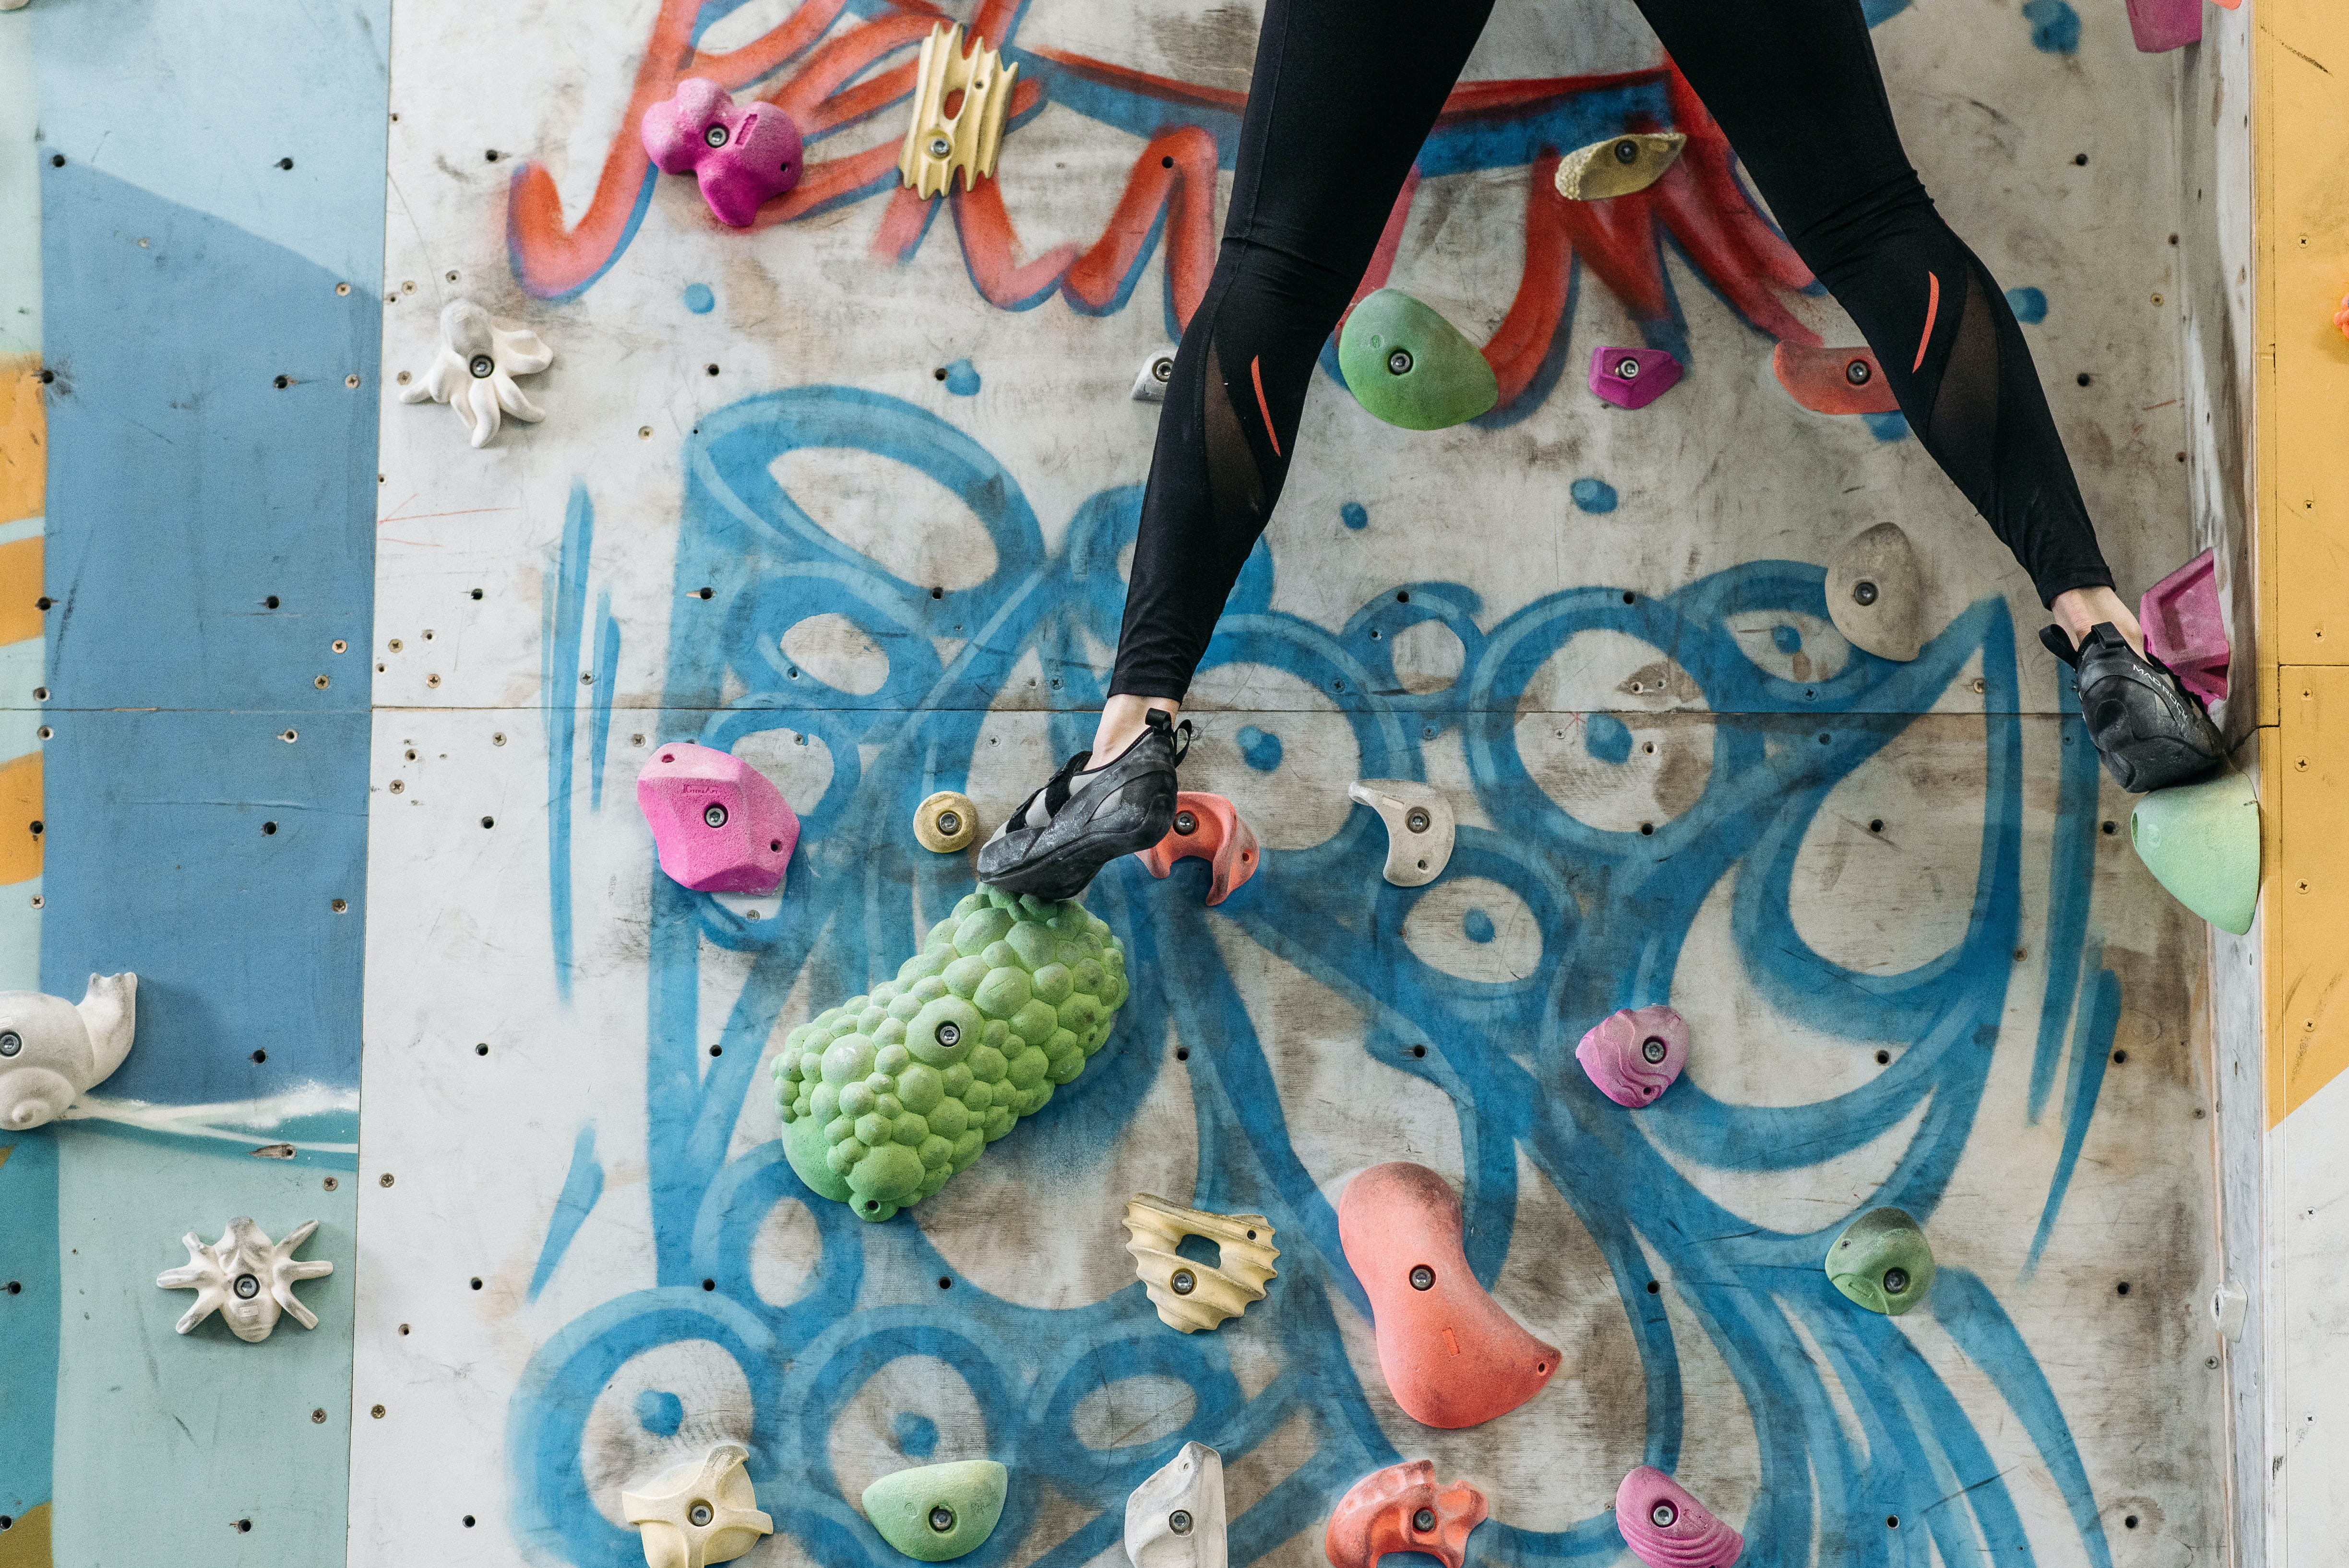 How to Choose the Best Climbing Shoe